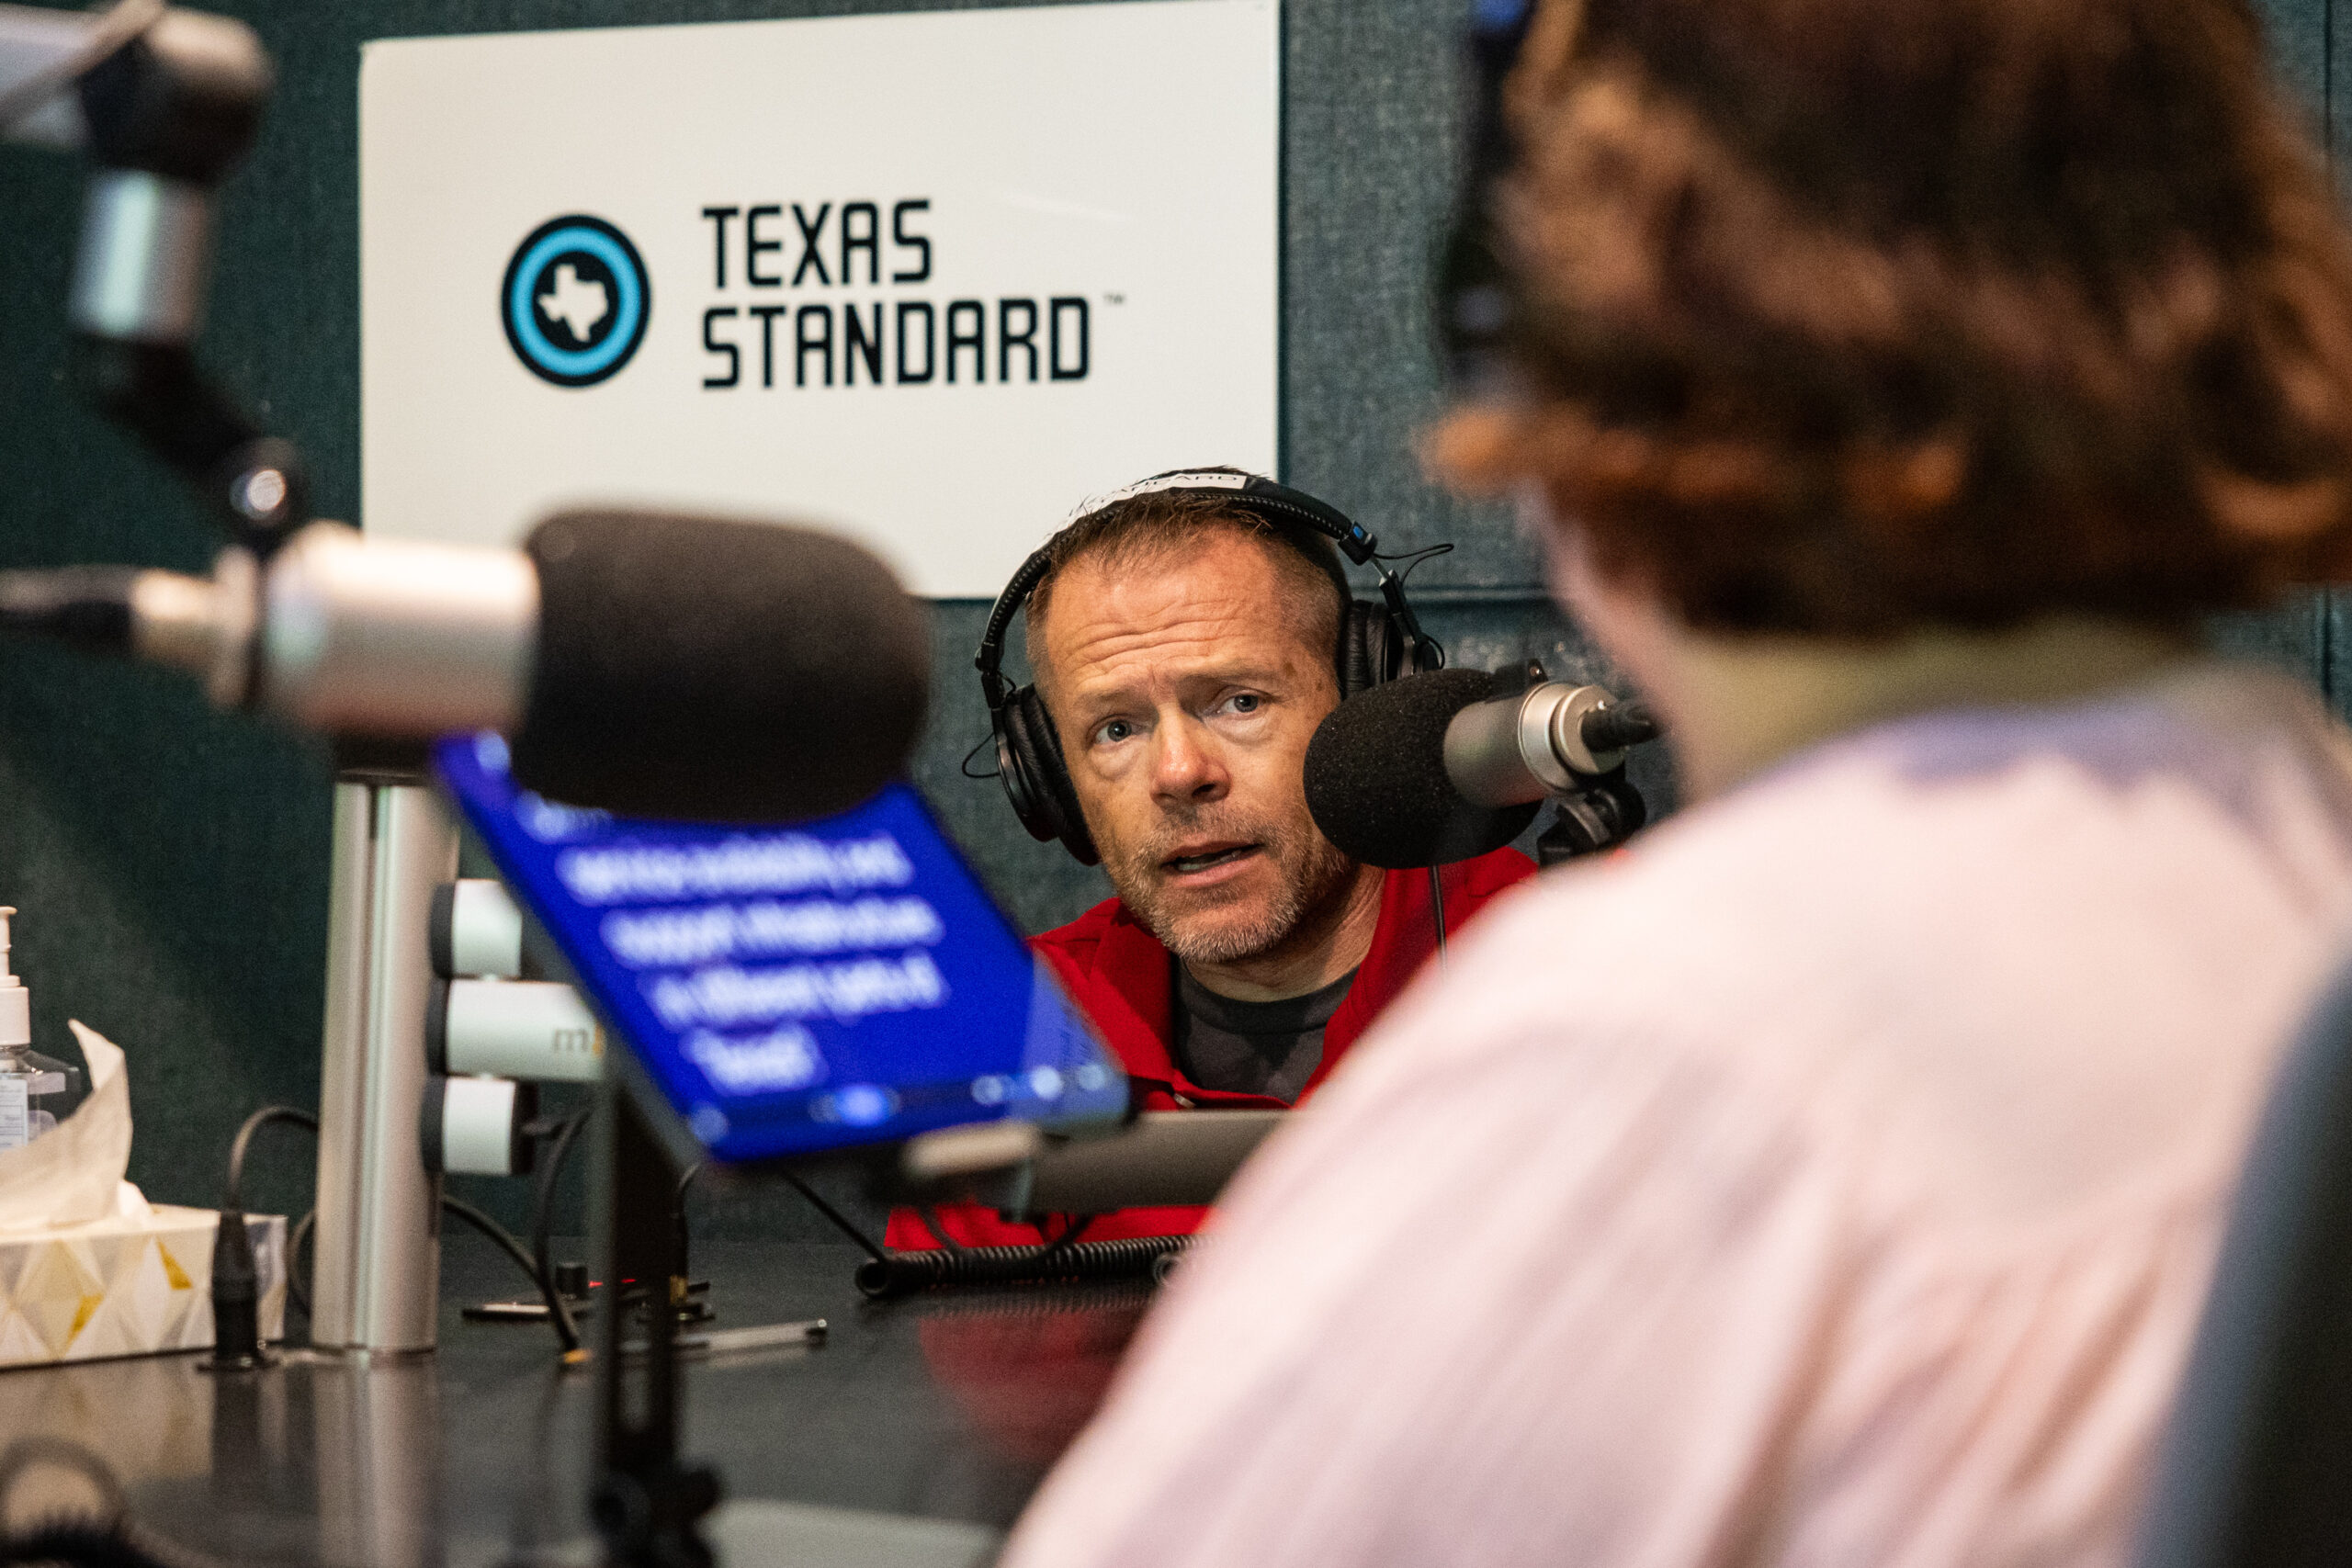 A man wearing over the ear headphones speaks into a microphone looking in the direction of a woman seated facing him in the foreground. He is Chase Bearden, of the Coalition of Texans with Disabilities, and he is speaking to Texas Standard reporter and producer Shelly Brisbin during a disability advocates roundtable. They are in a radio station recording studio. The Texas Standard logo is seen on the wall behind Bearden and a tablet showing a teleprompter app is seen sitting on the table between him and Brisbin.